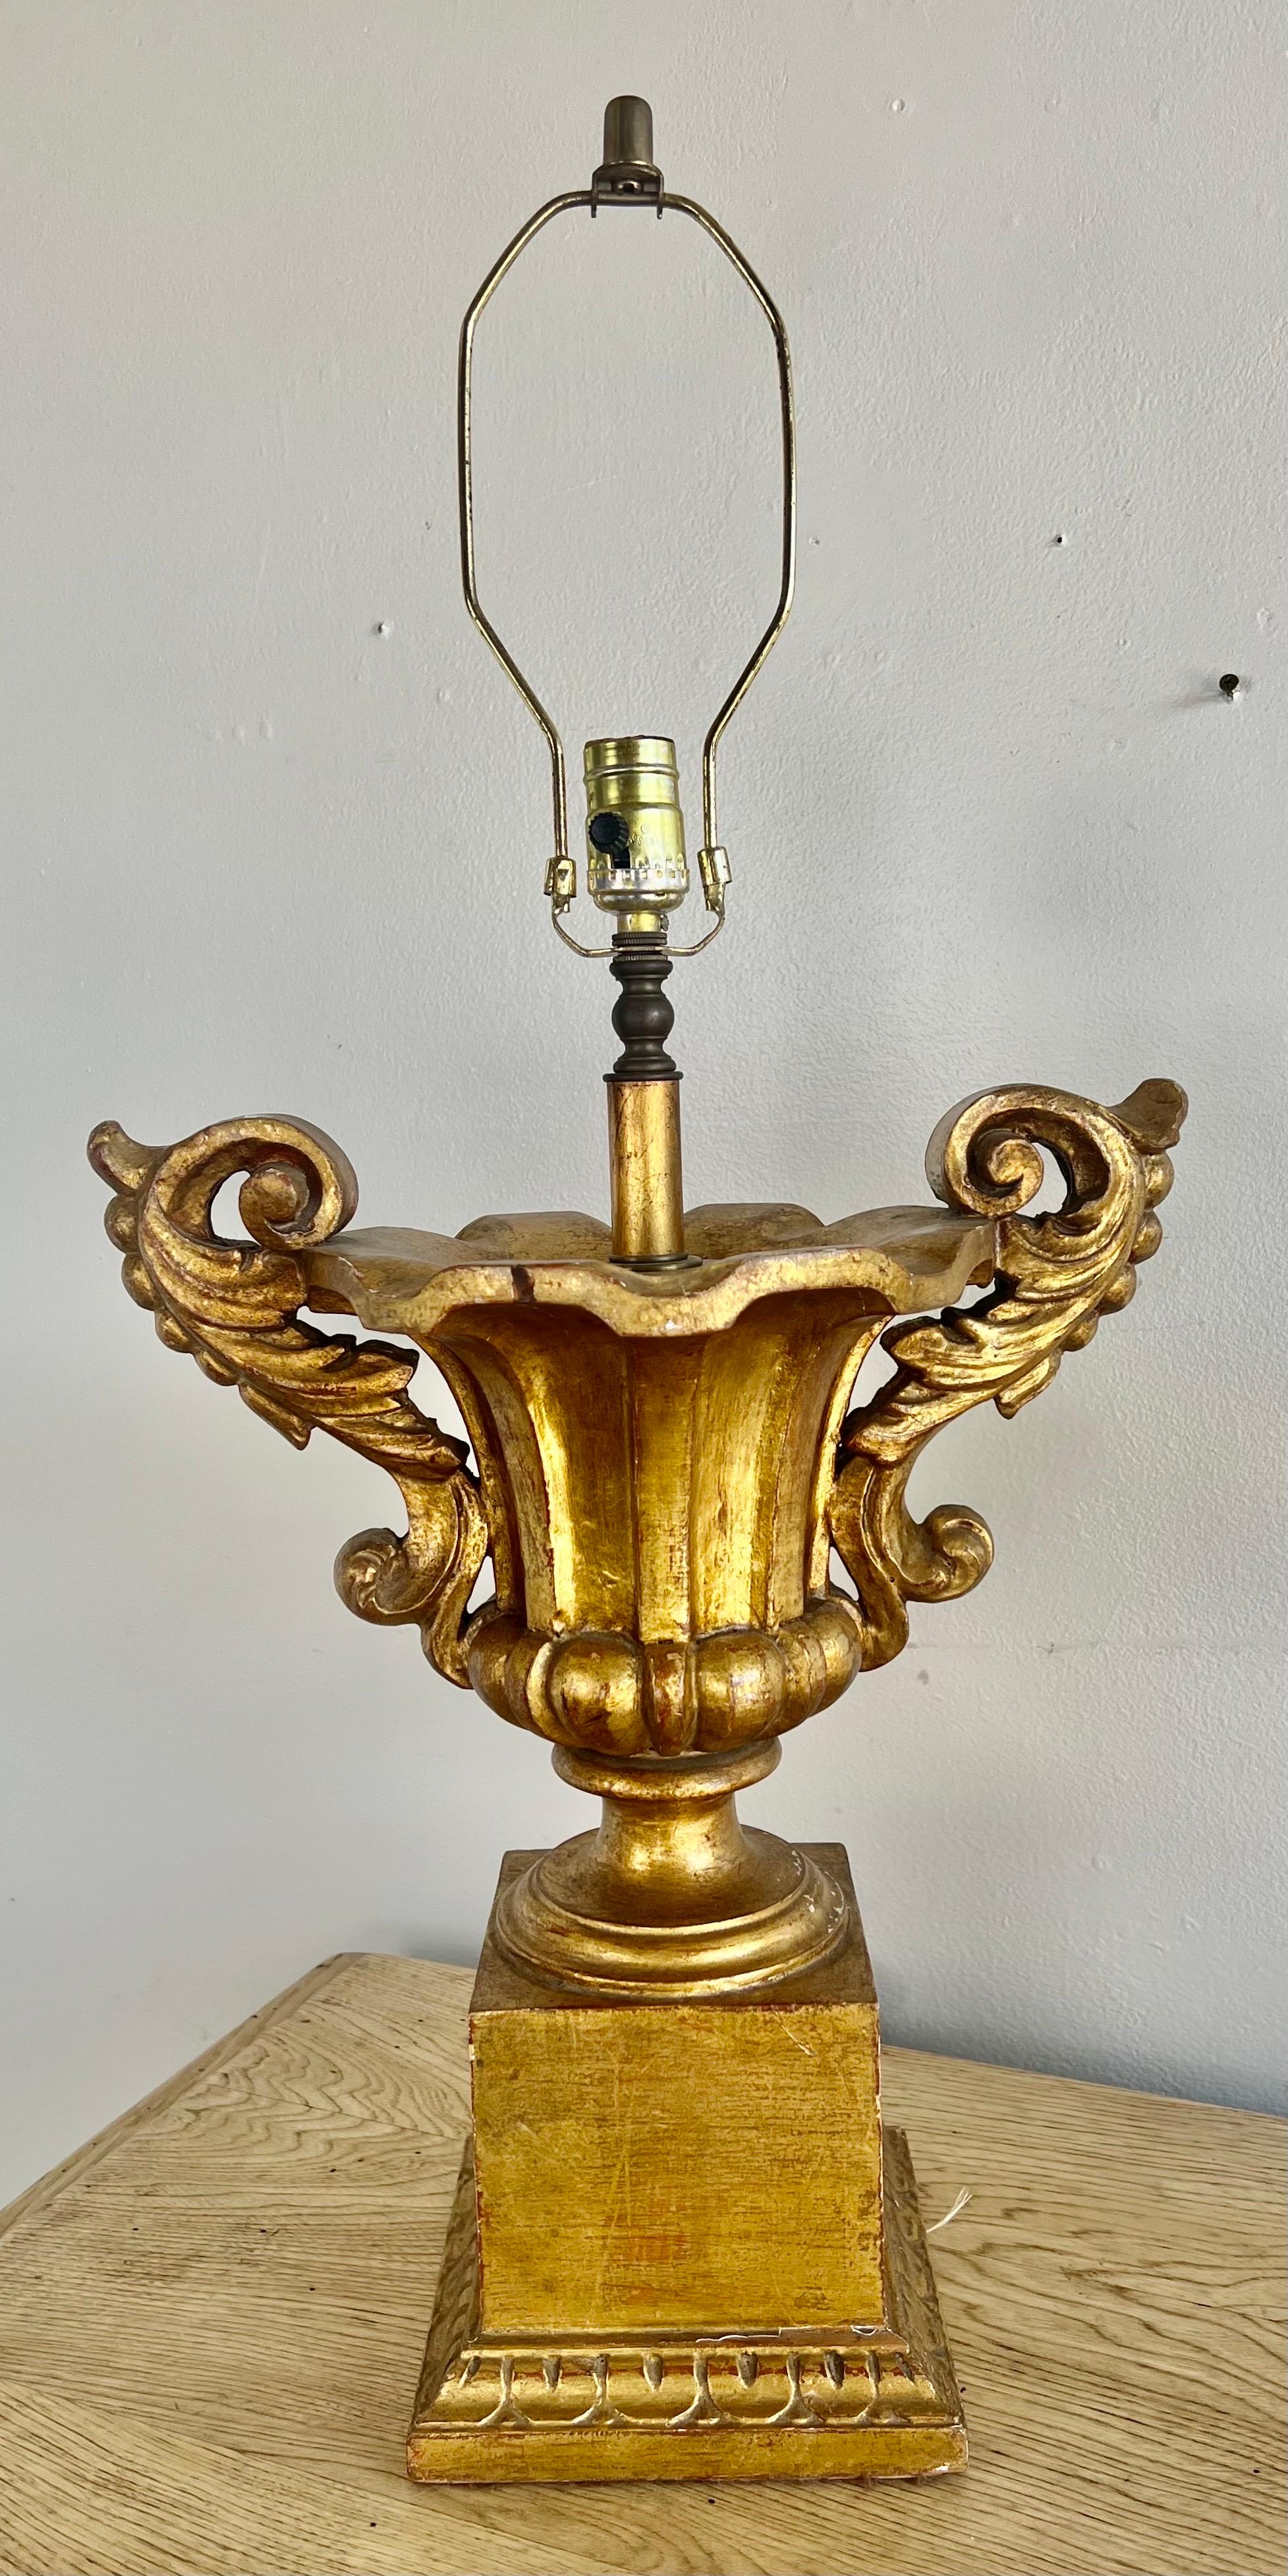 20th Century Pair of Giltwood Neoclassical Style Italian Urn Lamps C. 1930 For Sale